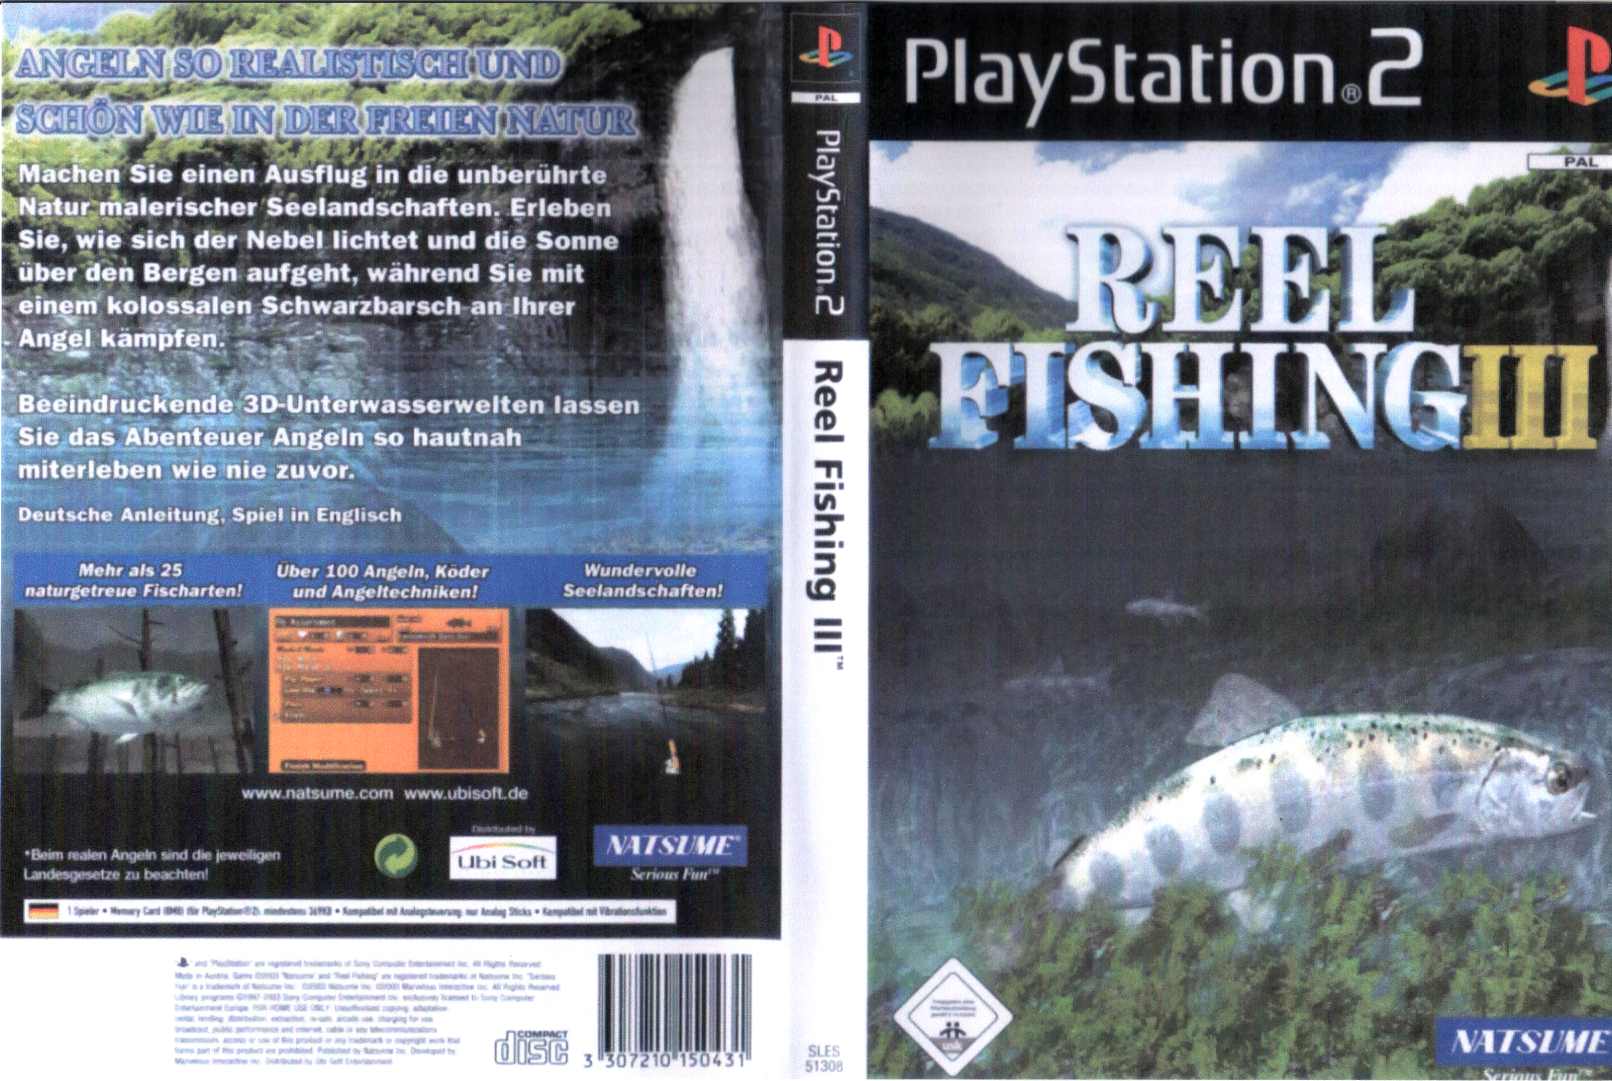 Reel Fishing Wild, Dreamcast Covers, Cover Century